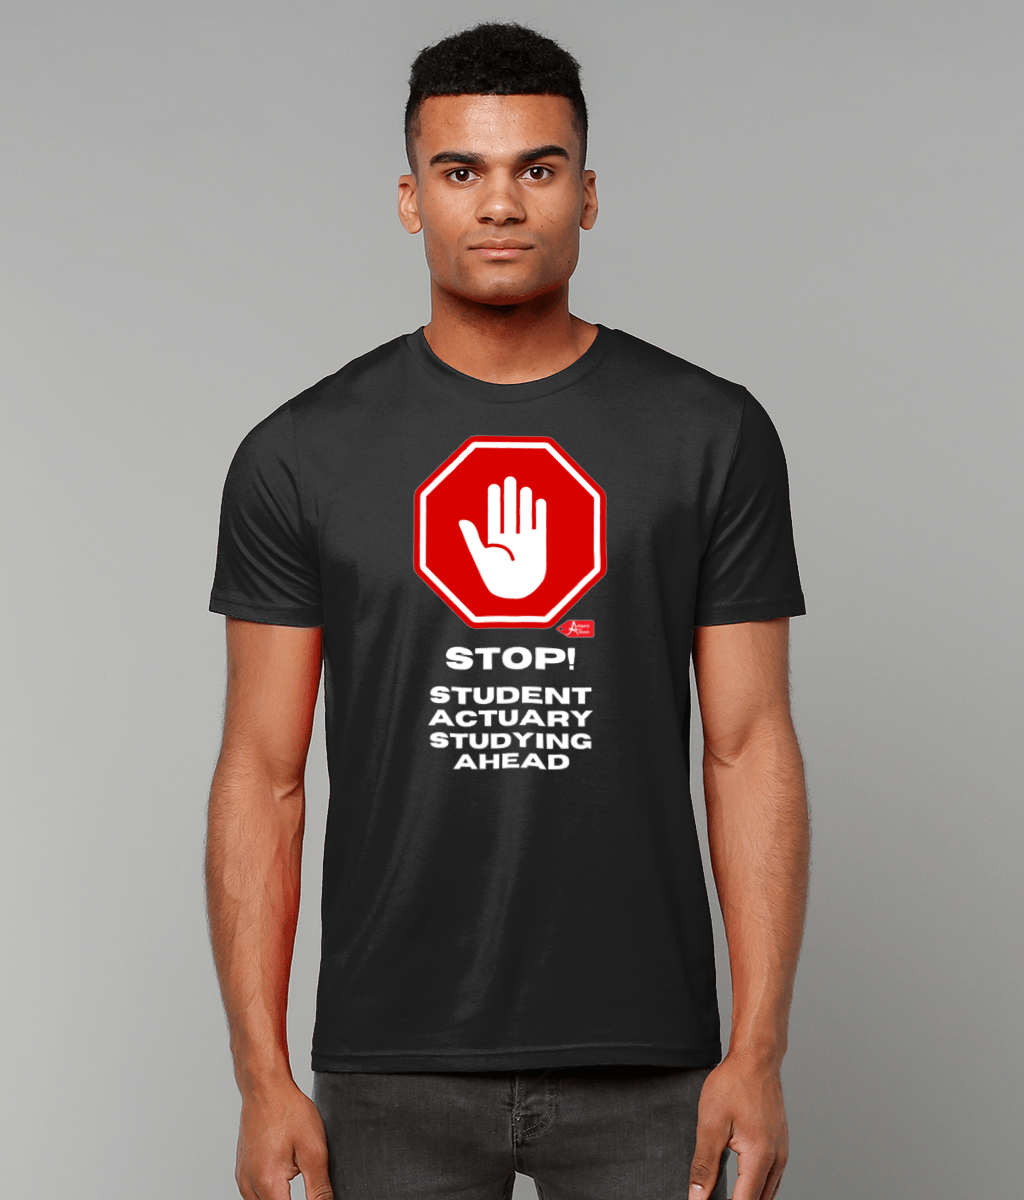 Stop! Student Actuary Studying Ahead T-Shirt